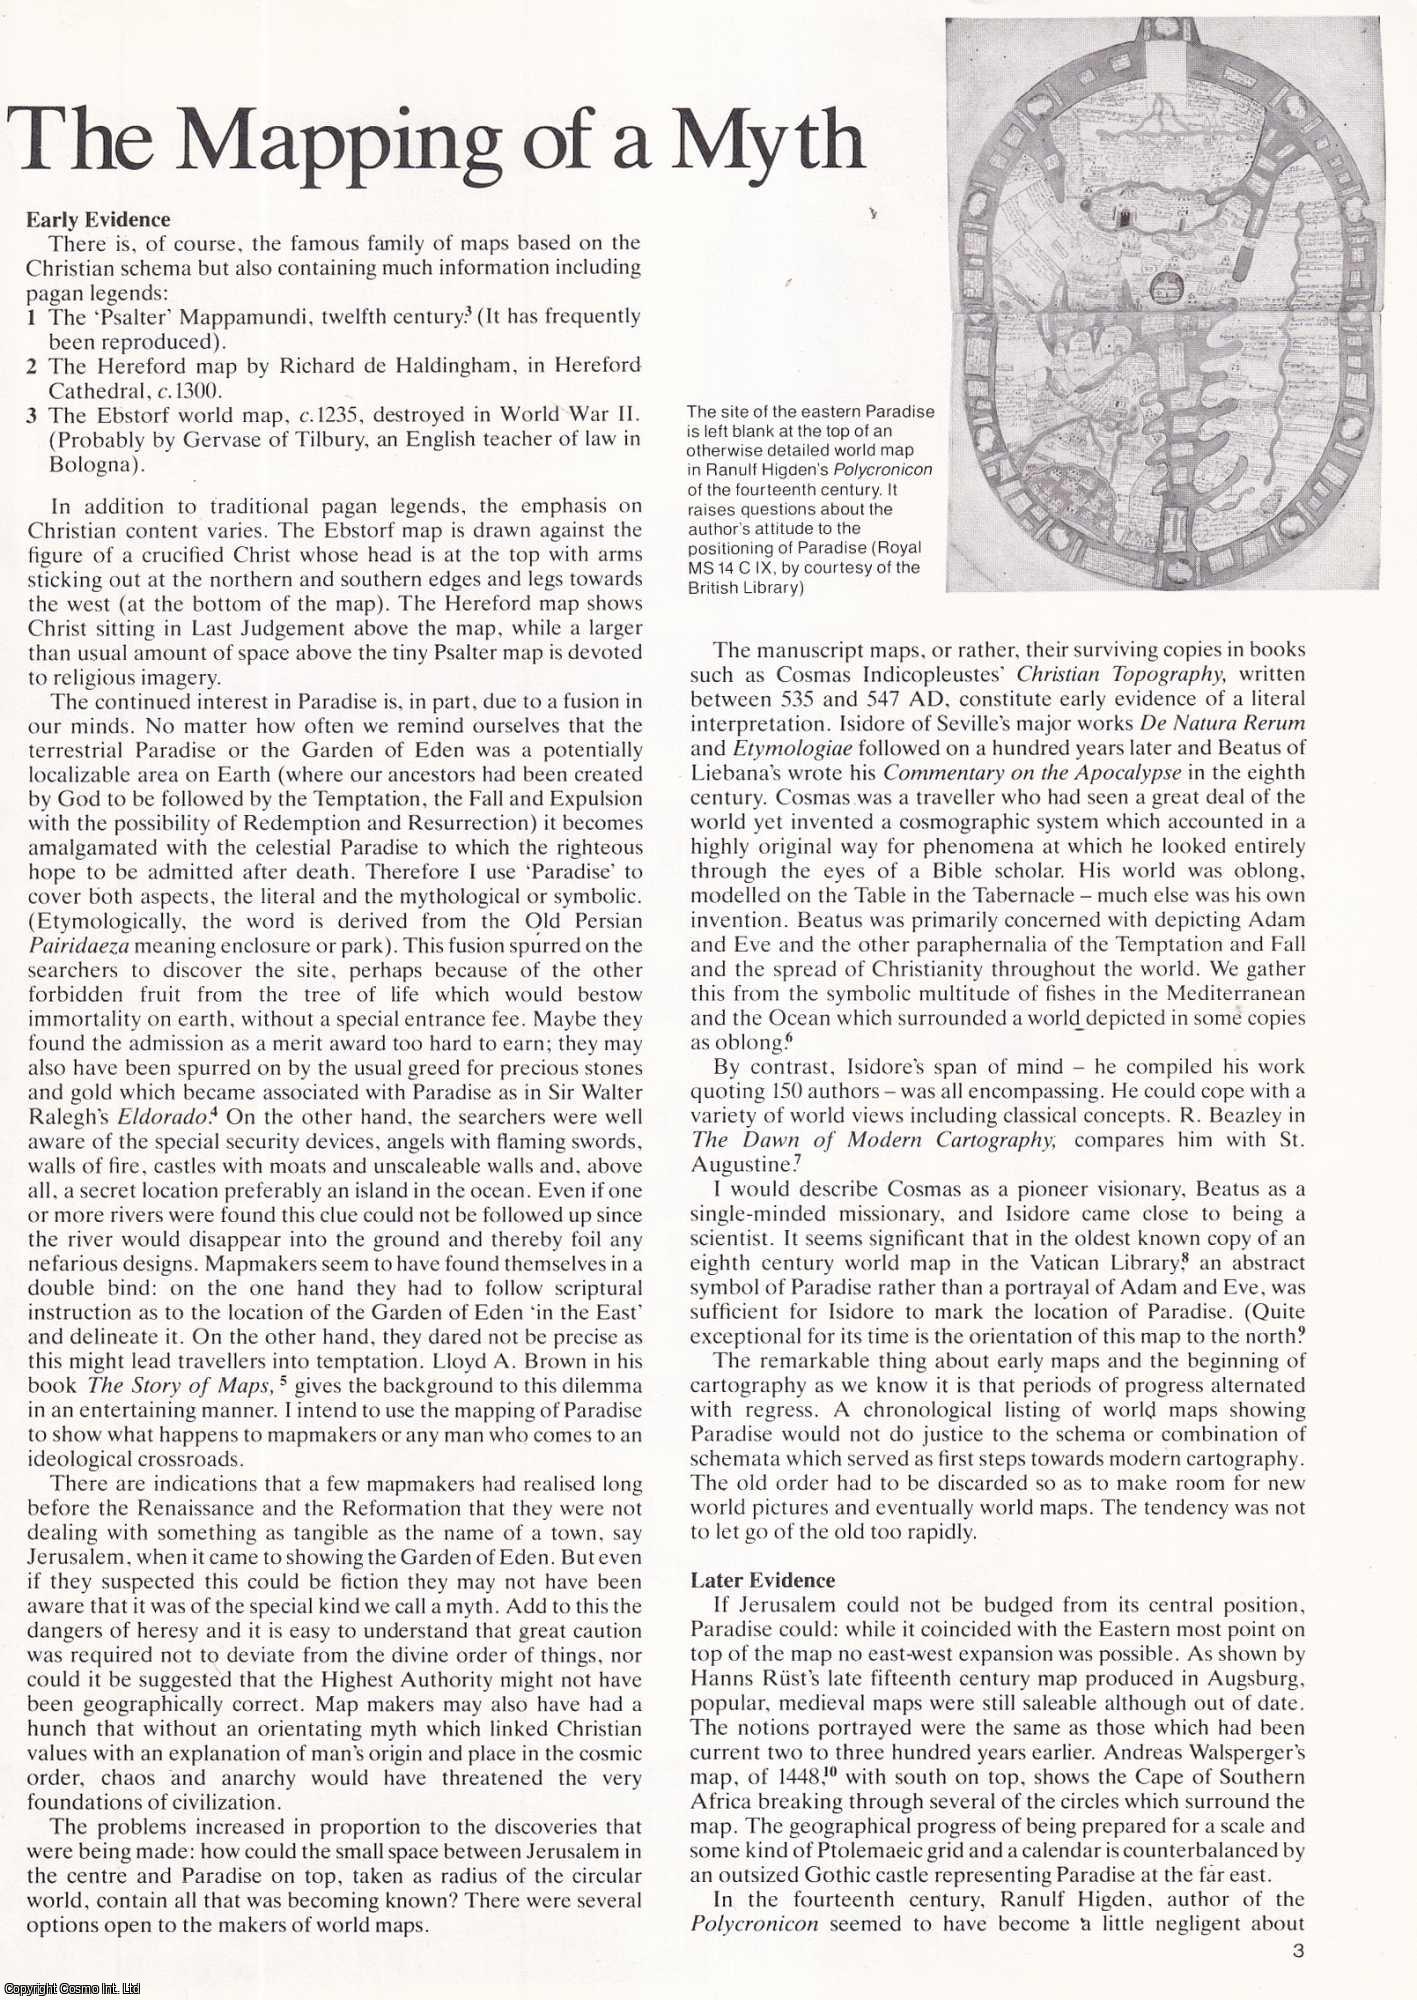 Fred Plaut - Where is Paradise? The Mapping of a Myth. An original article from Map Collector Magazine, 1984.